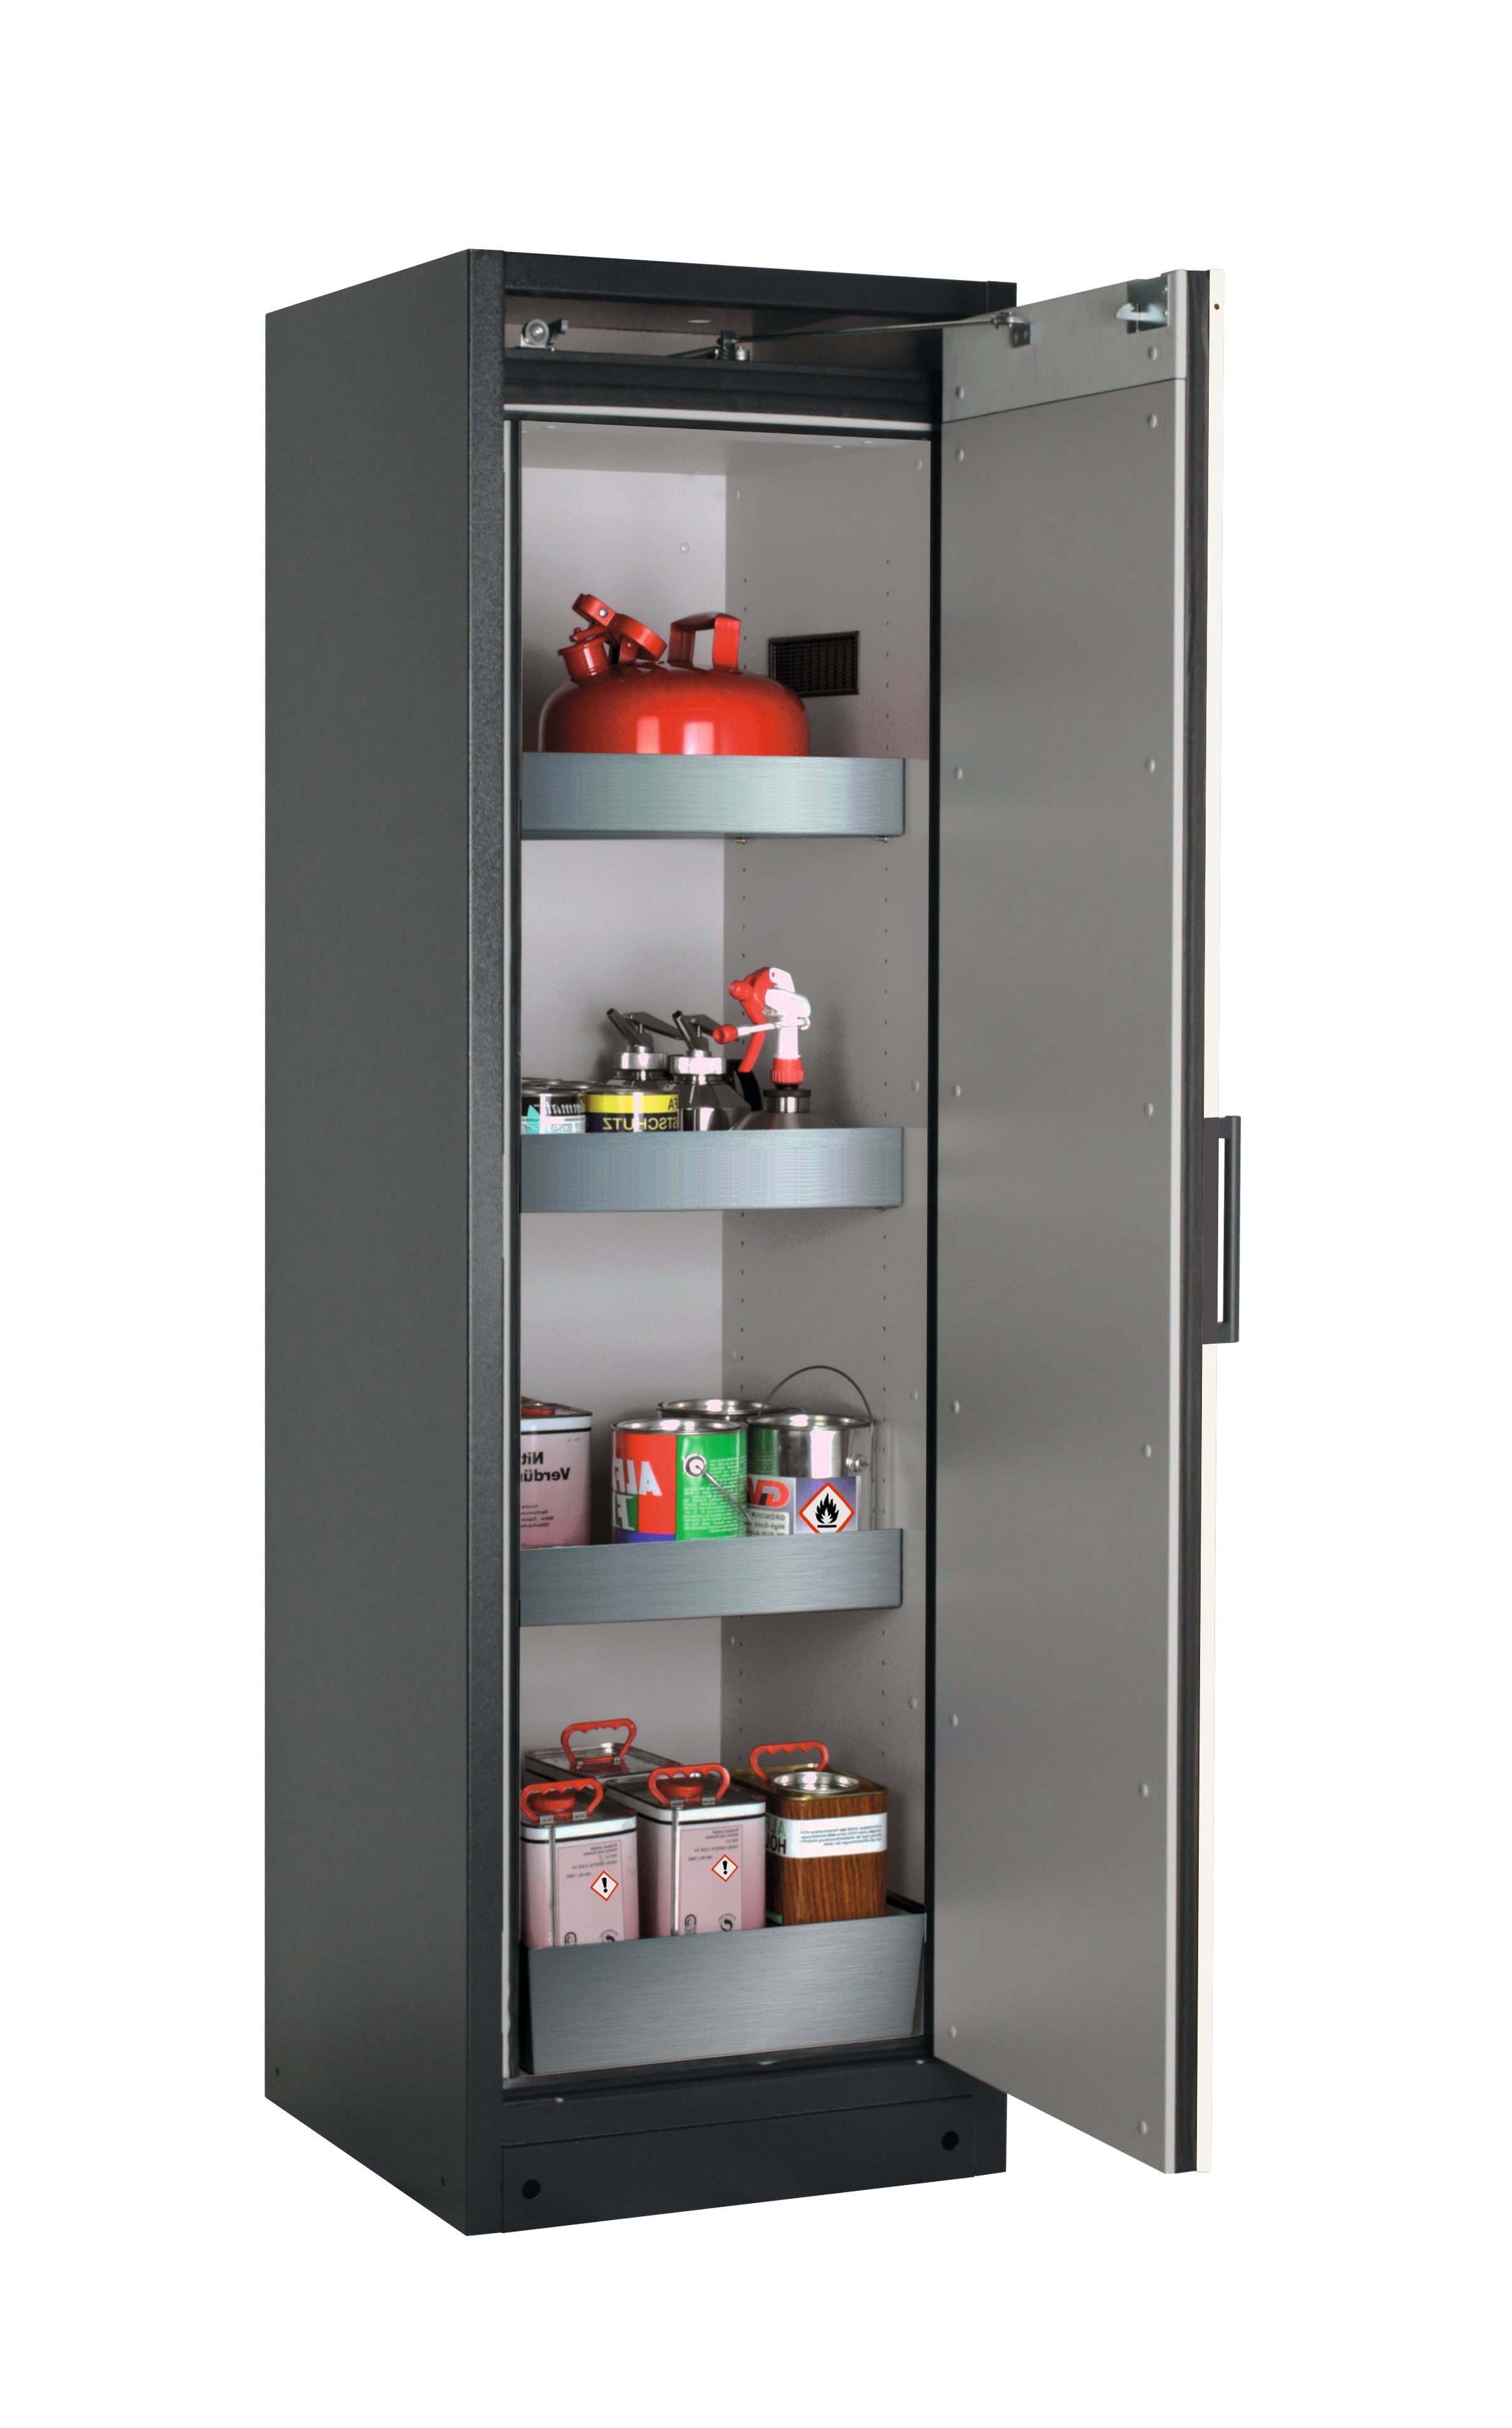 Type 90 safety storage cabinet Q-CLASSIC-90 model Q90.195.060.R in asecos silver with 3x tray shelf (standard) (stainless steel 1.4301),